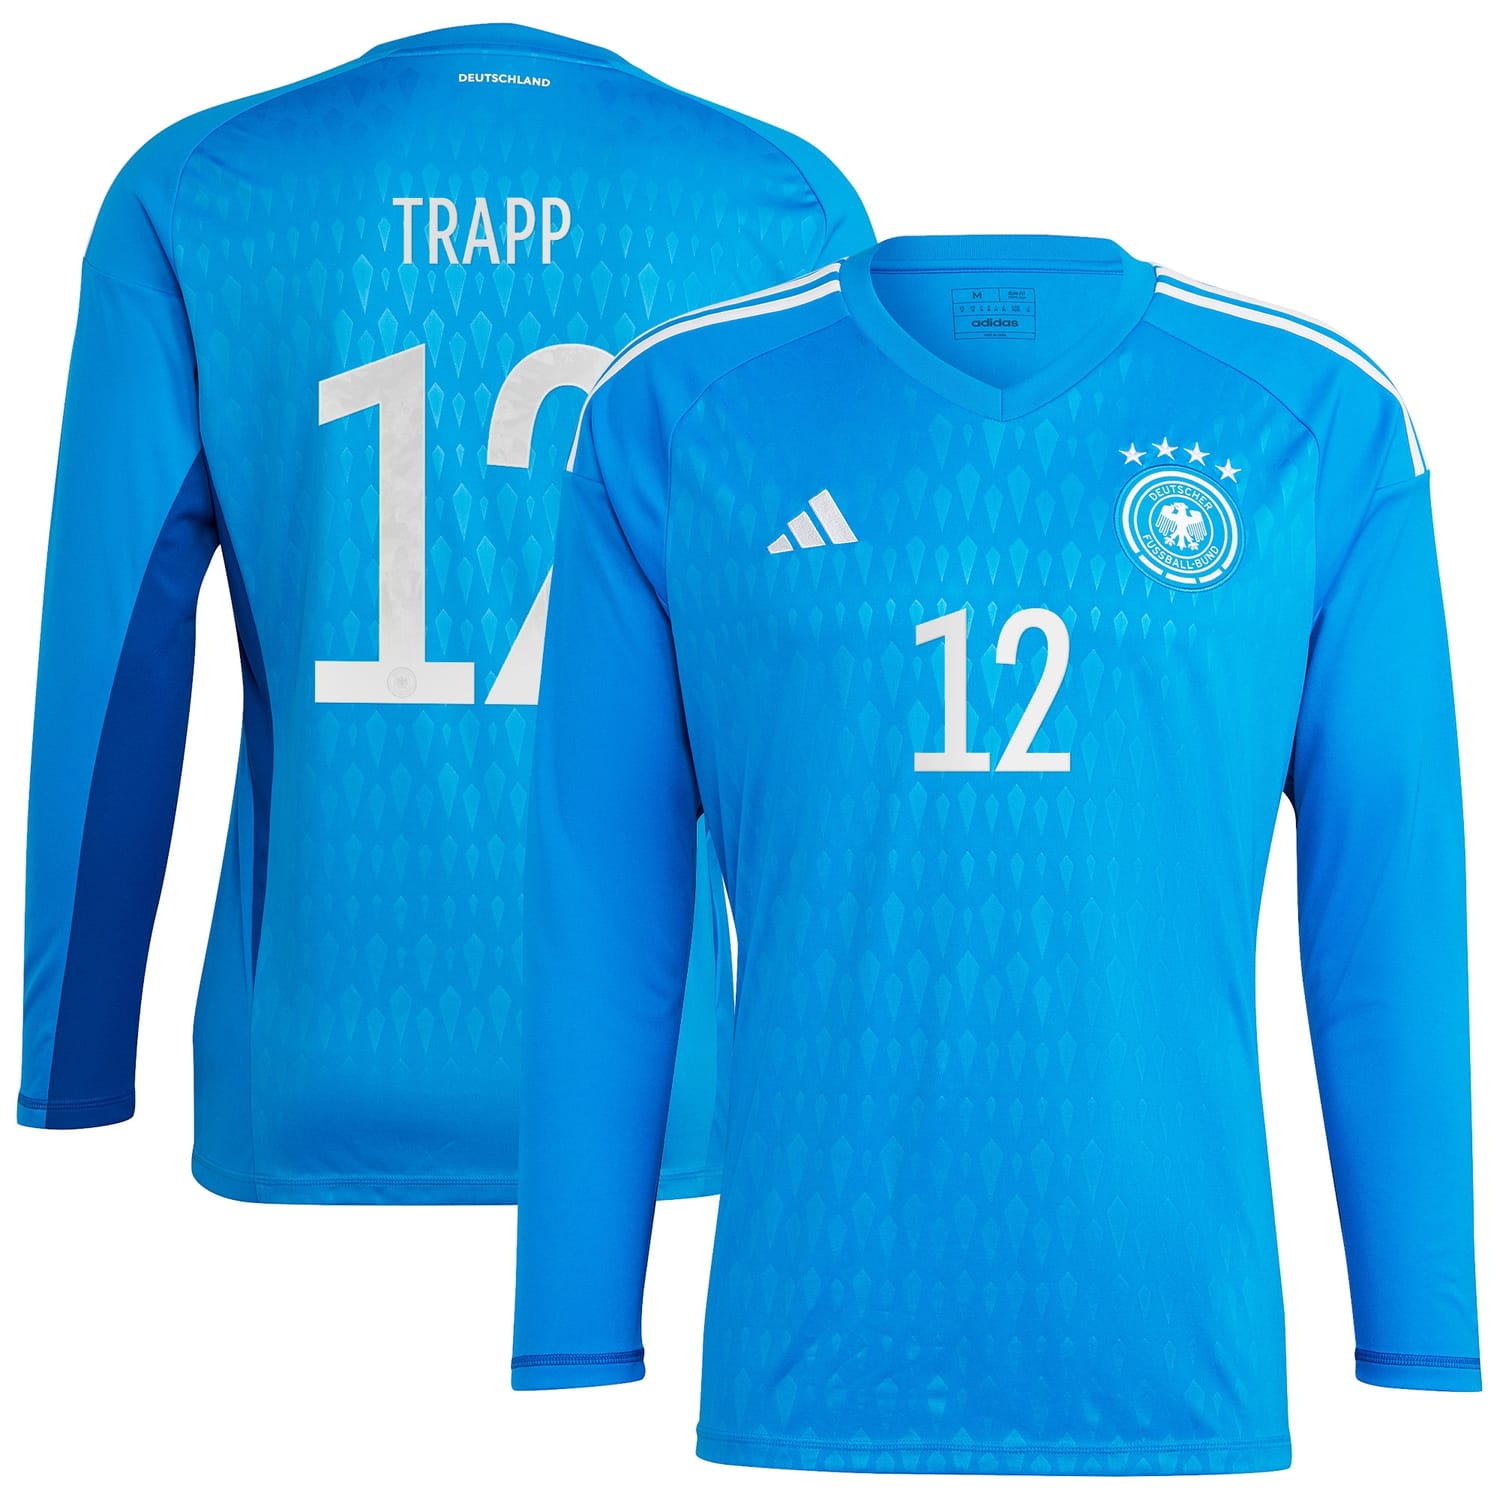 Germany National Team Goalkeeper Jersey Shirt Long Sleeve player Kevin Trapp 12 printing for Men